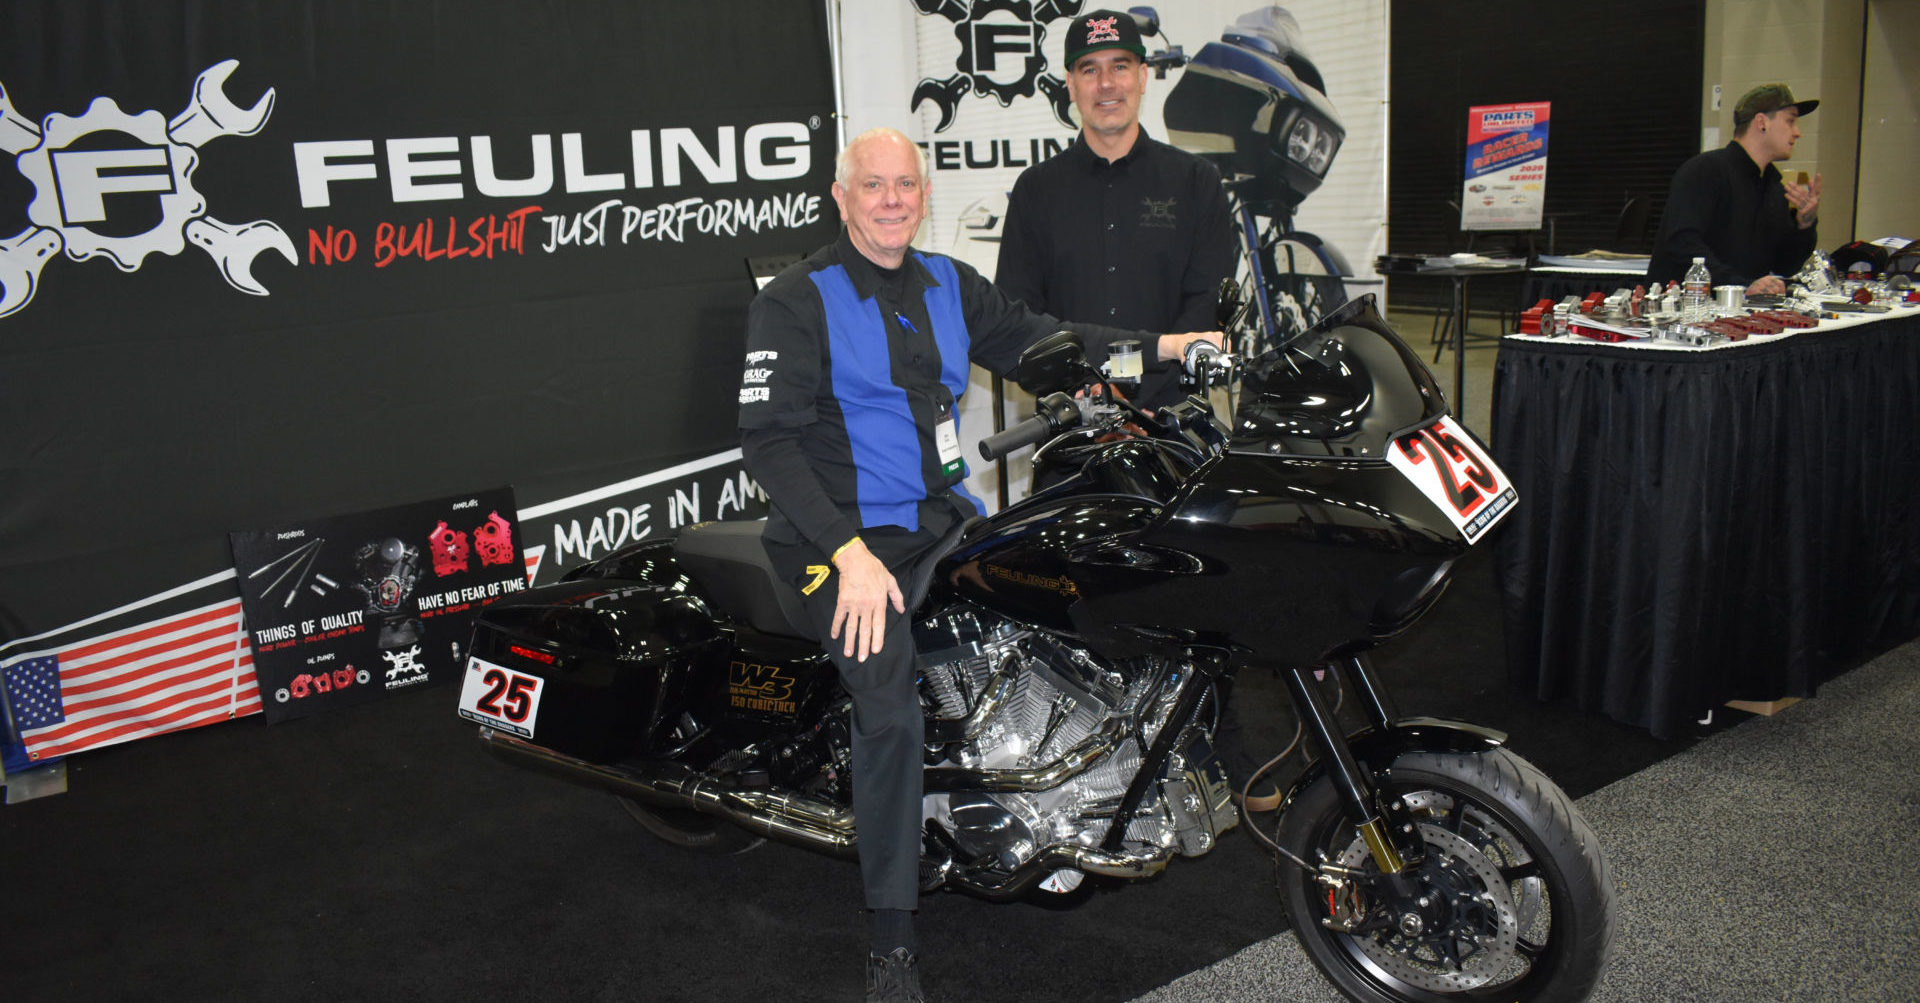 Feuling's Luke Leatherman (right with Don Emde (left), who has been named the Grand Marshal for the Drag Specialties King of the Baggers that will run in conjunction with the MotoAmerica round scheduled for WeatherTech Raceway Laguna Seca, July 10-12. Emde will pace the field on this three-cylinder Feuling W3. Photo courtesy of MotoAmerica.